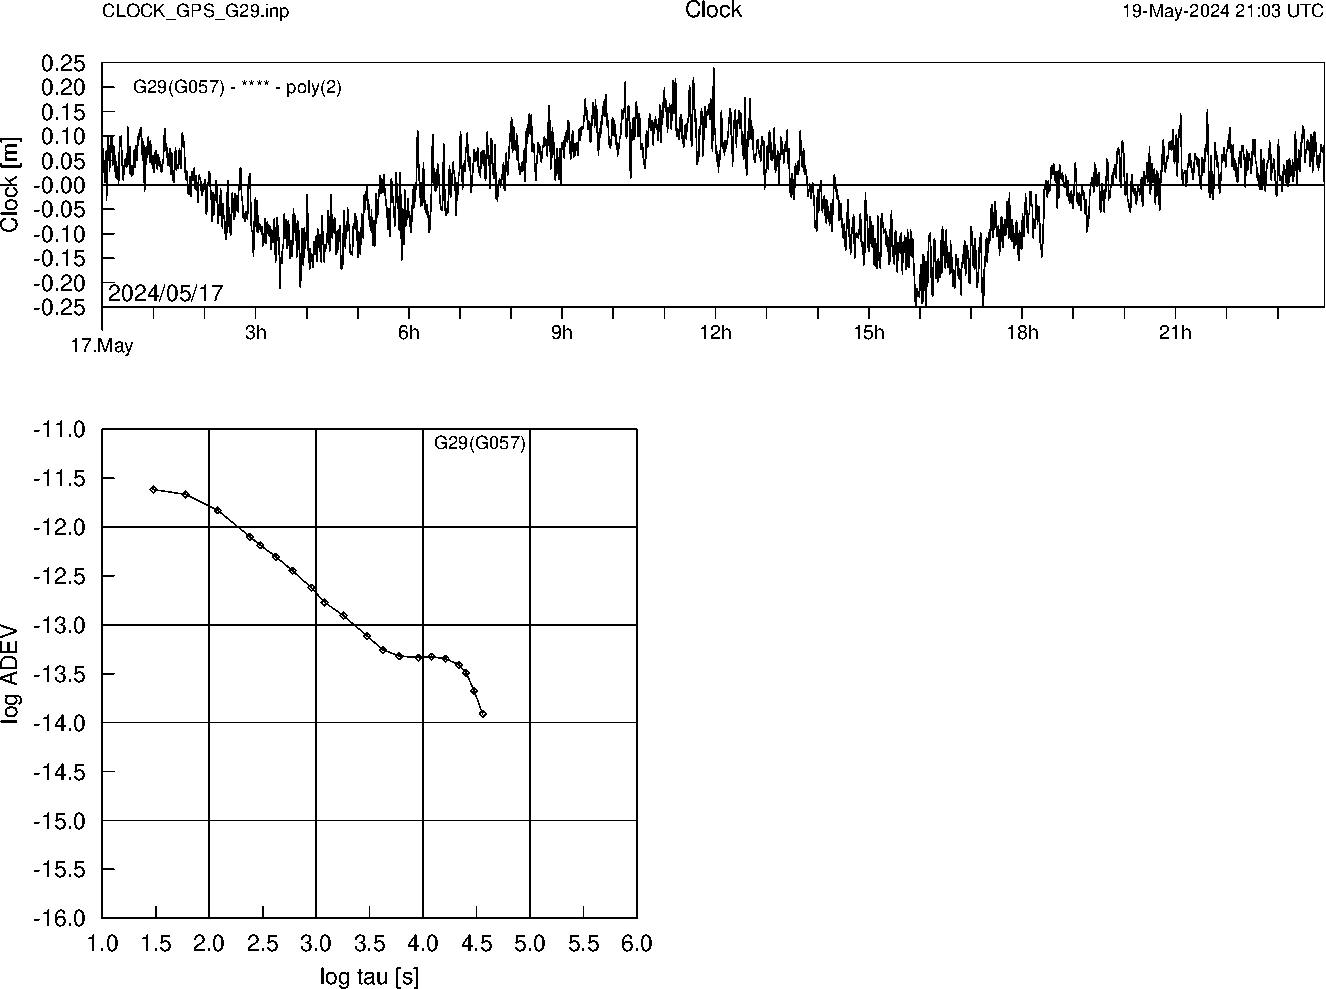 GPS G29 Clock Time Series and Allan Deviation